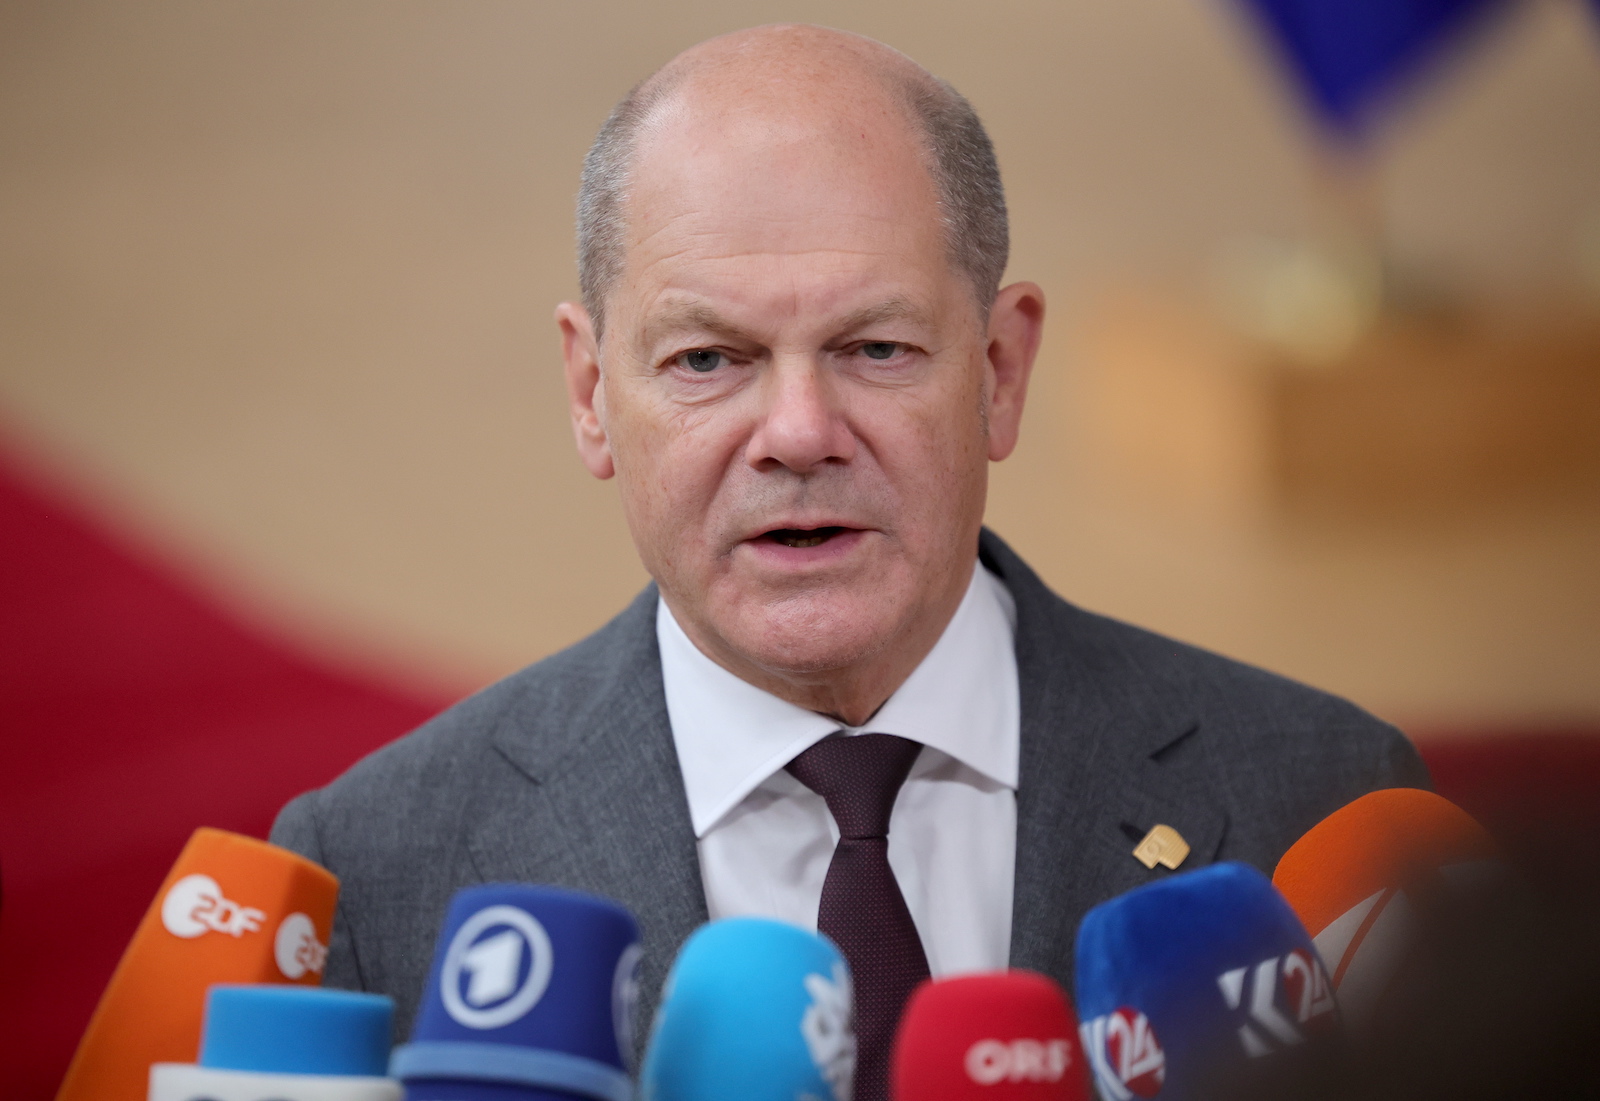 epa10716798 Germany's Chancellor Olaf Scholz speaks to the media as he arrives for a European Council in Brussels, Belgium, 29 June 2023. EU leaders are gathering in Brussels for a two-day summit to discuss the latest developments in relation to Russia's invasion of Ukraine and continued EU support for Ukraine as well as the block's economy, security, migration and external relations, among other topics.  EPA/OLIVIER MATTHYS